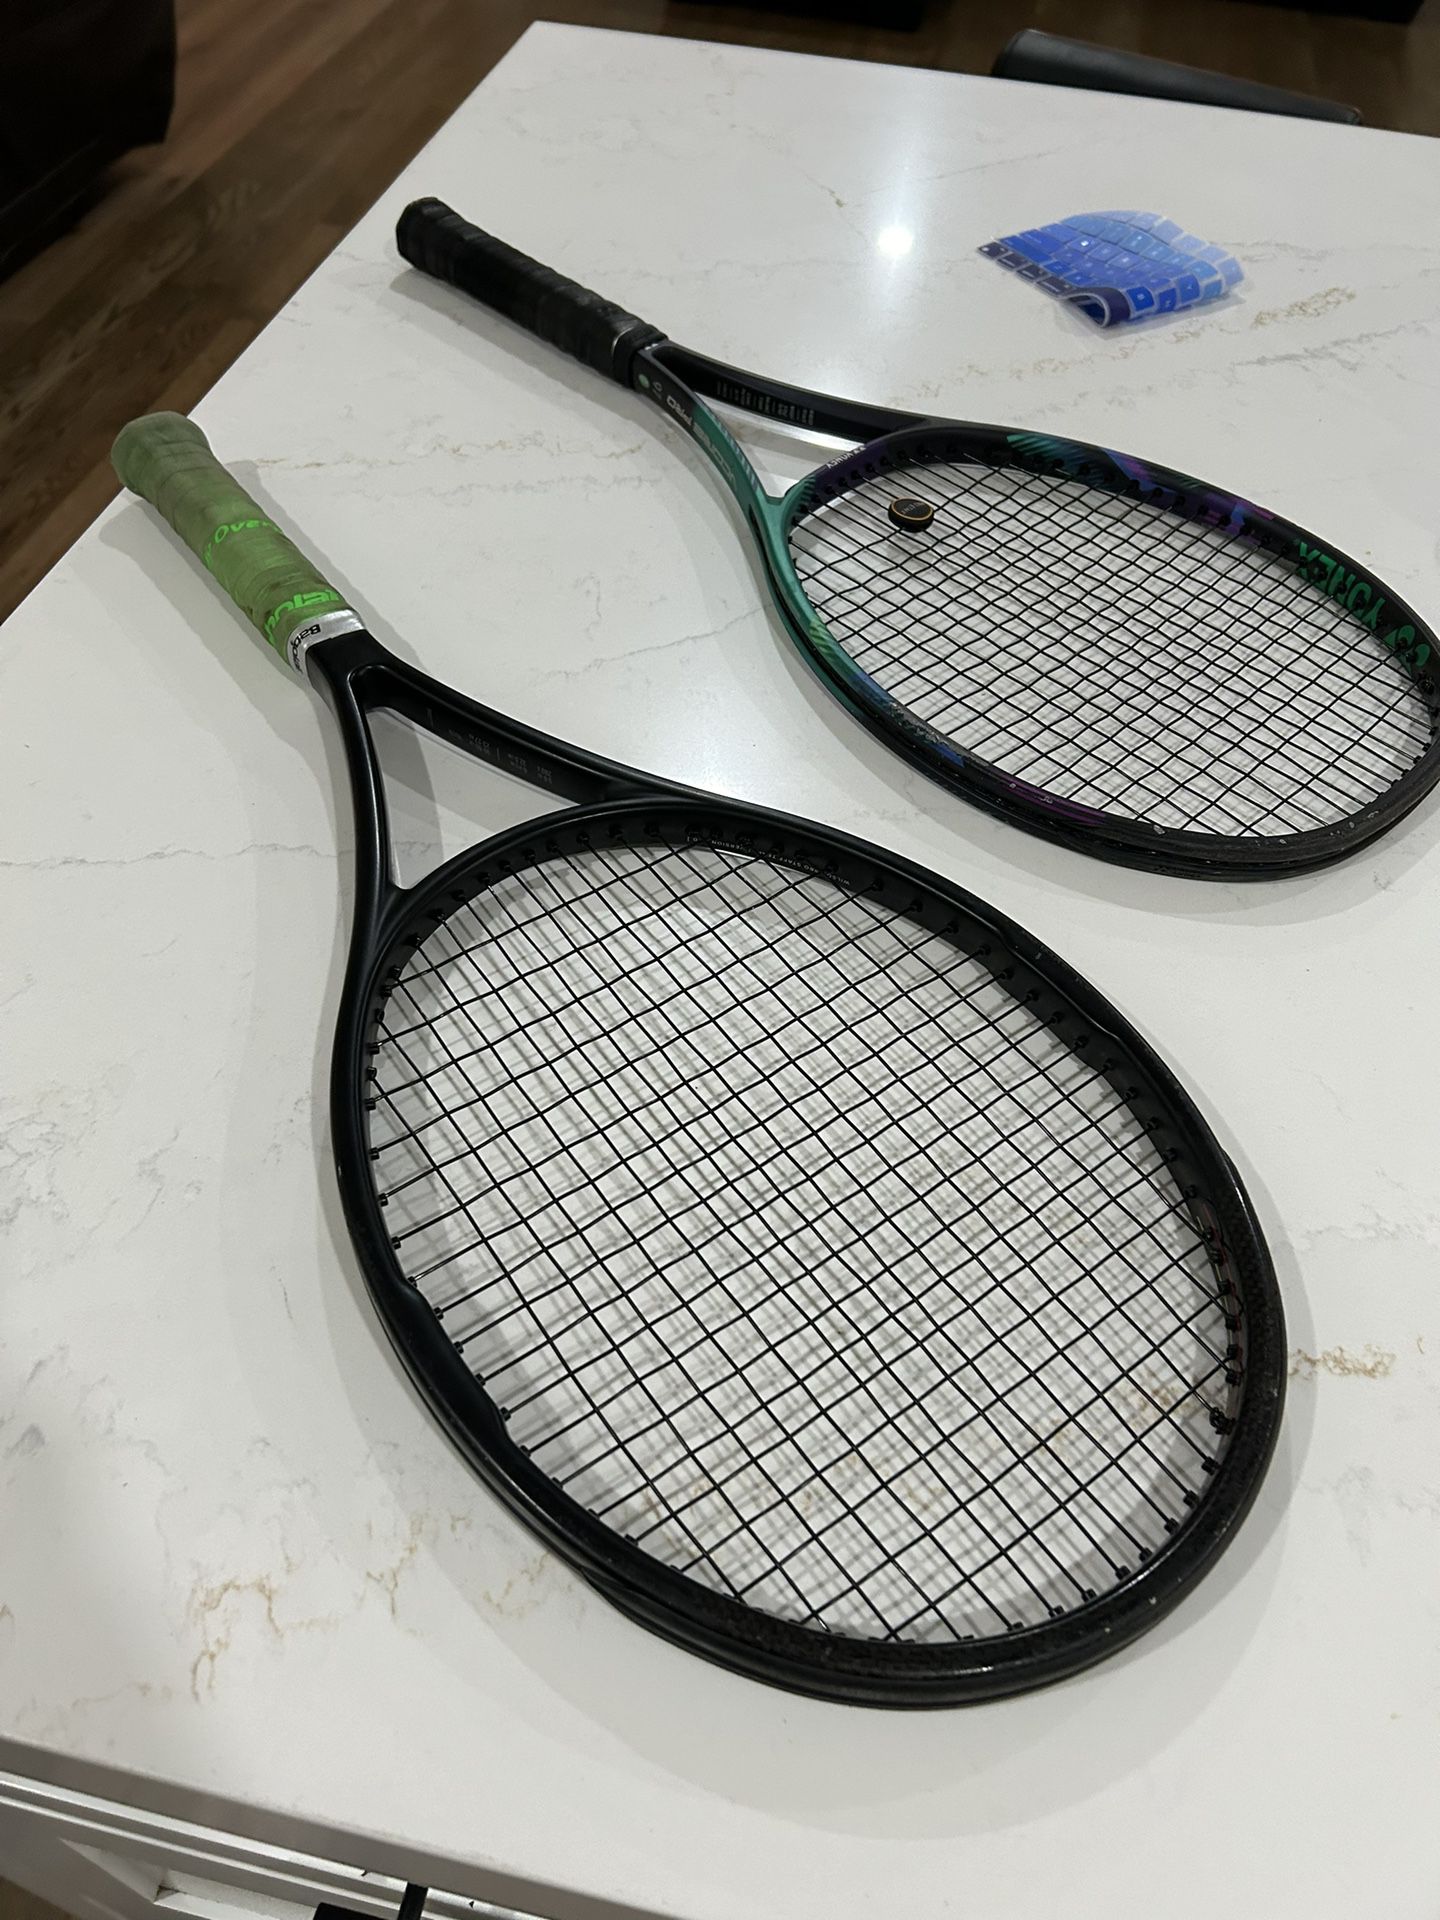 Tennis Rackets Vcore Pro And Pro Staff